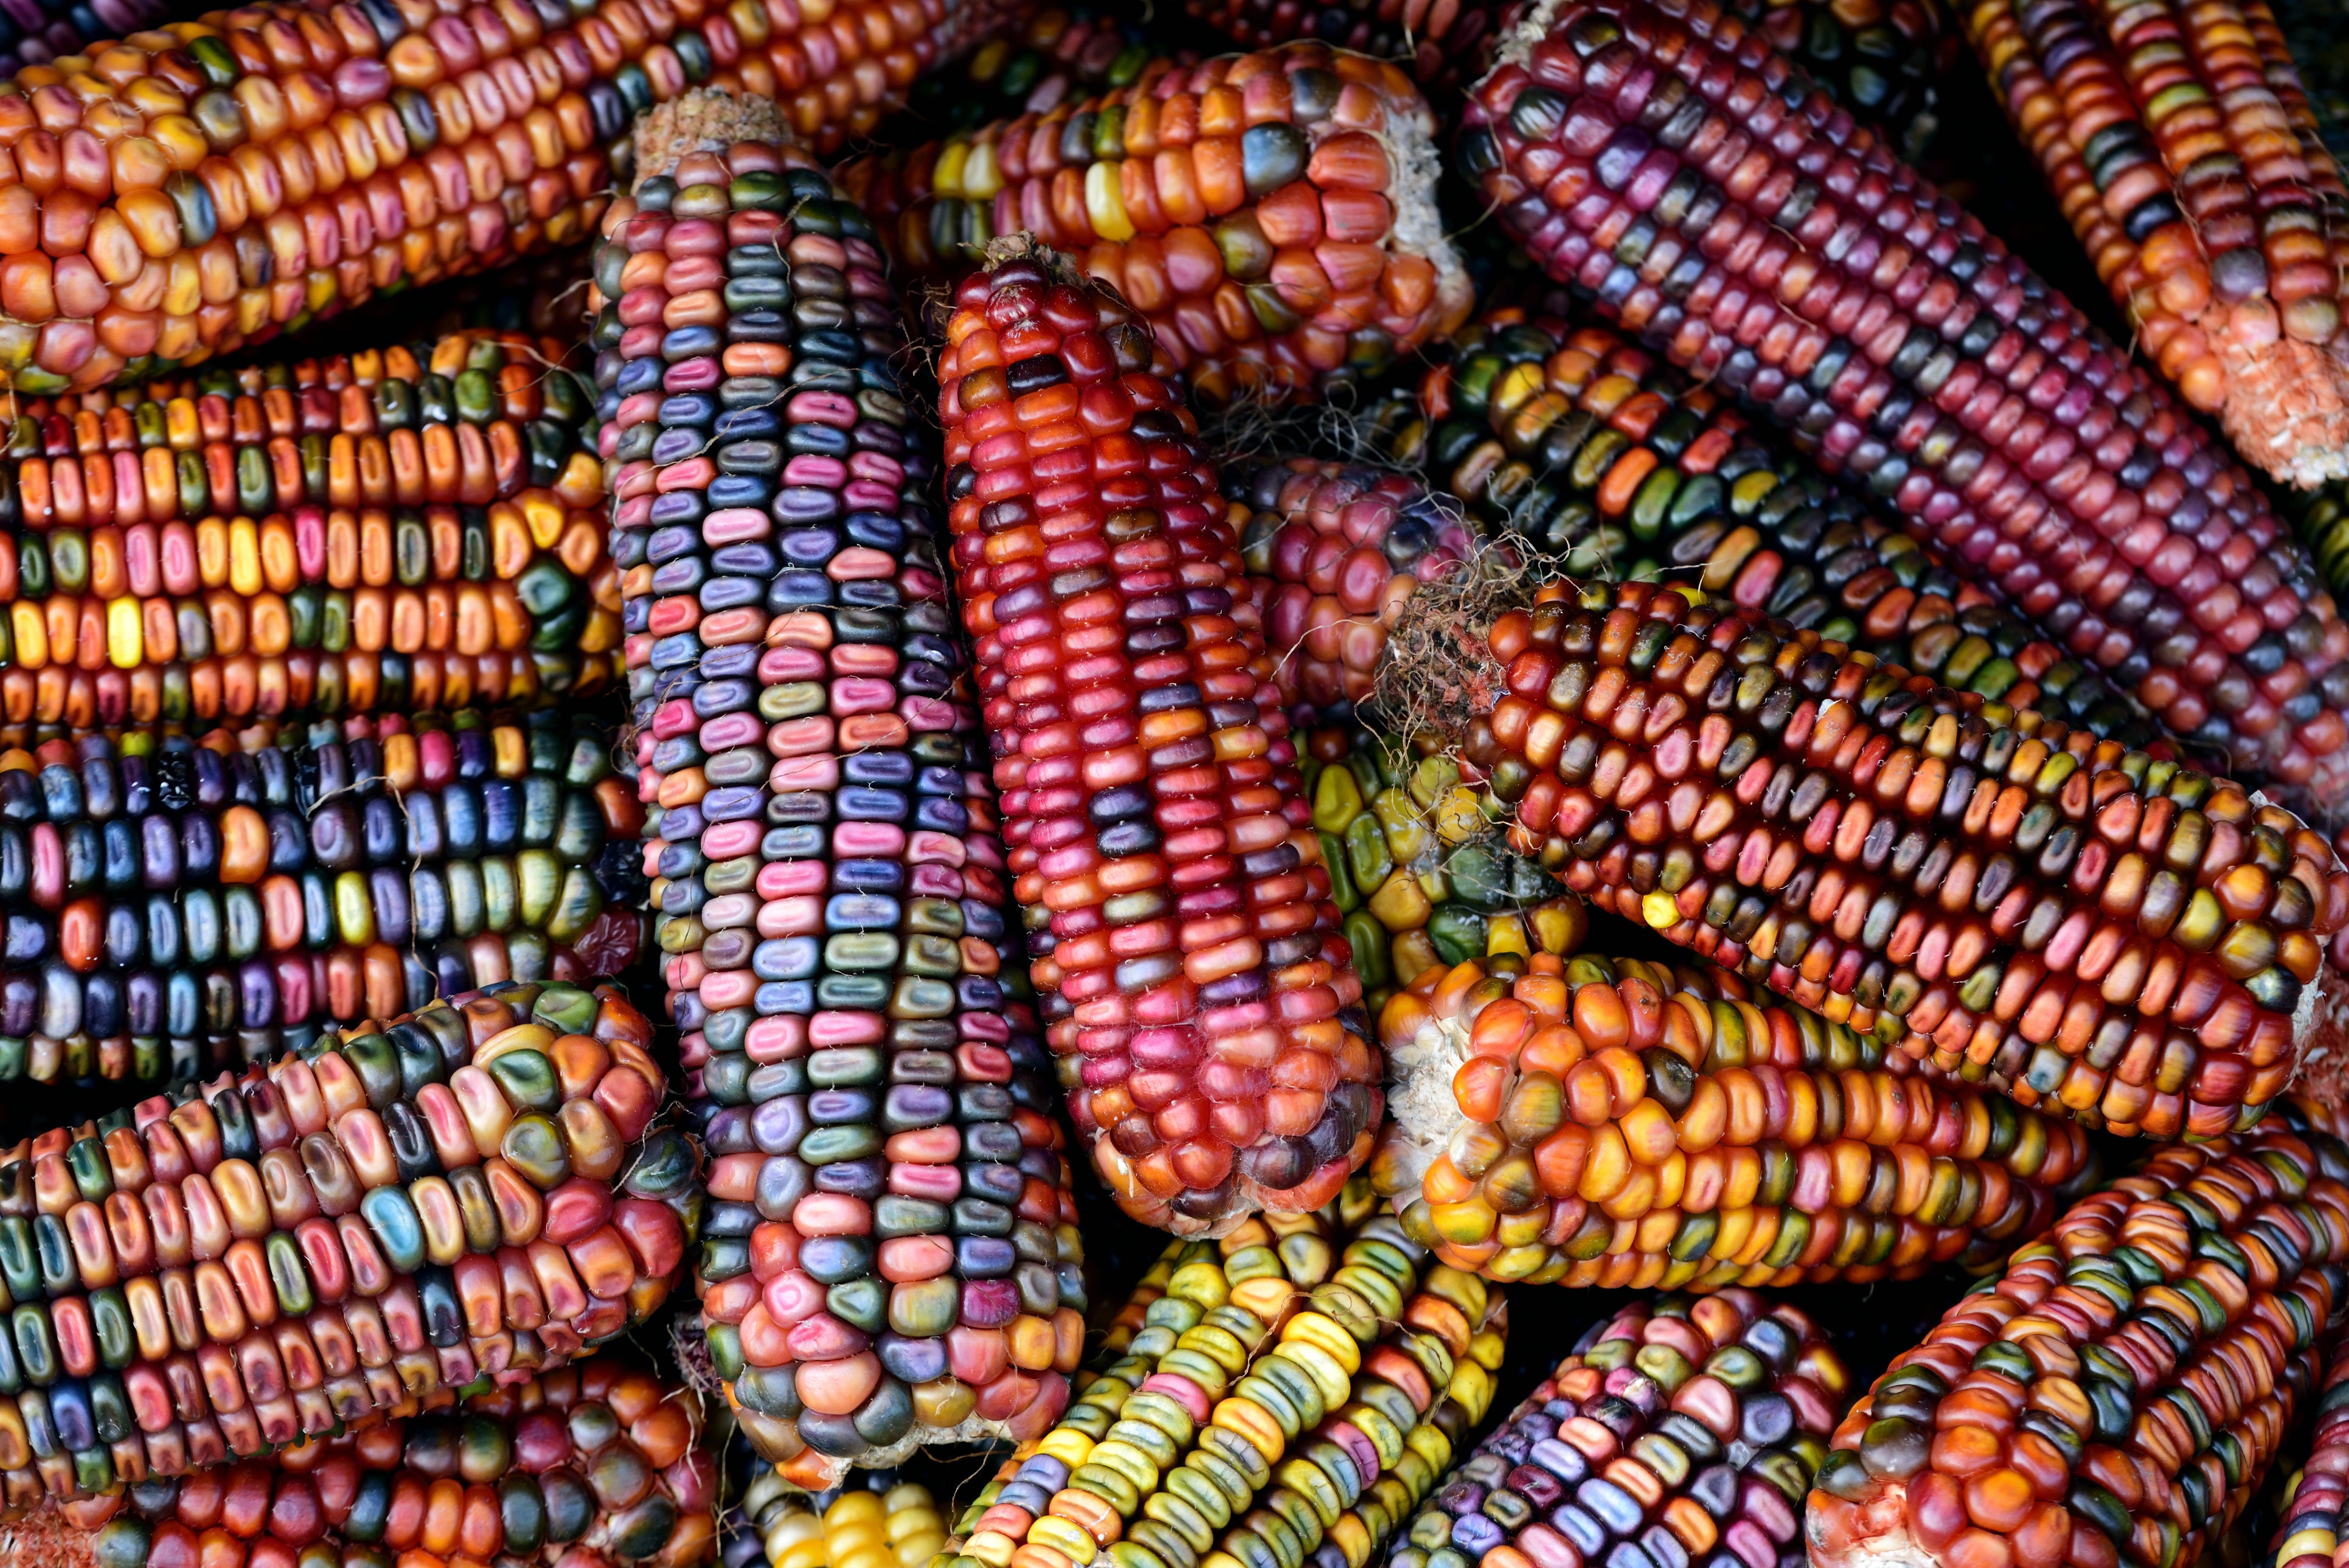 The history of maize can help us understand why seed banks may not offer us the long term solution we need